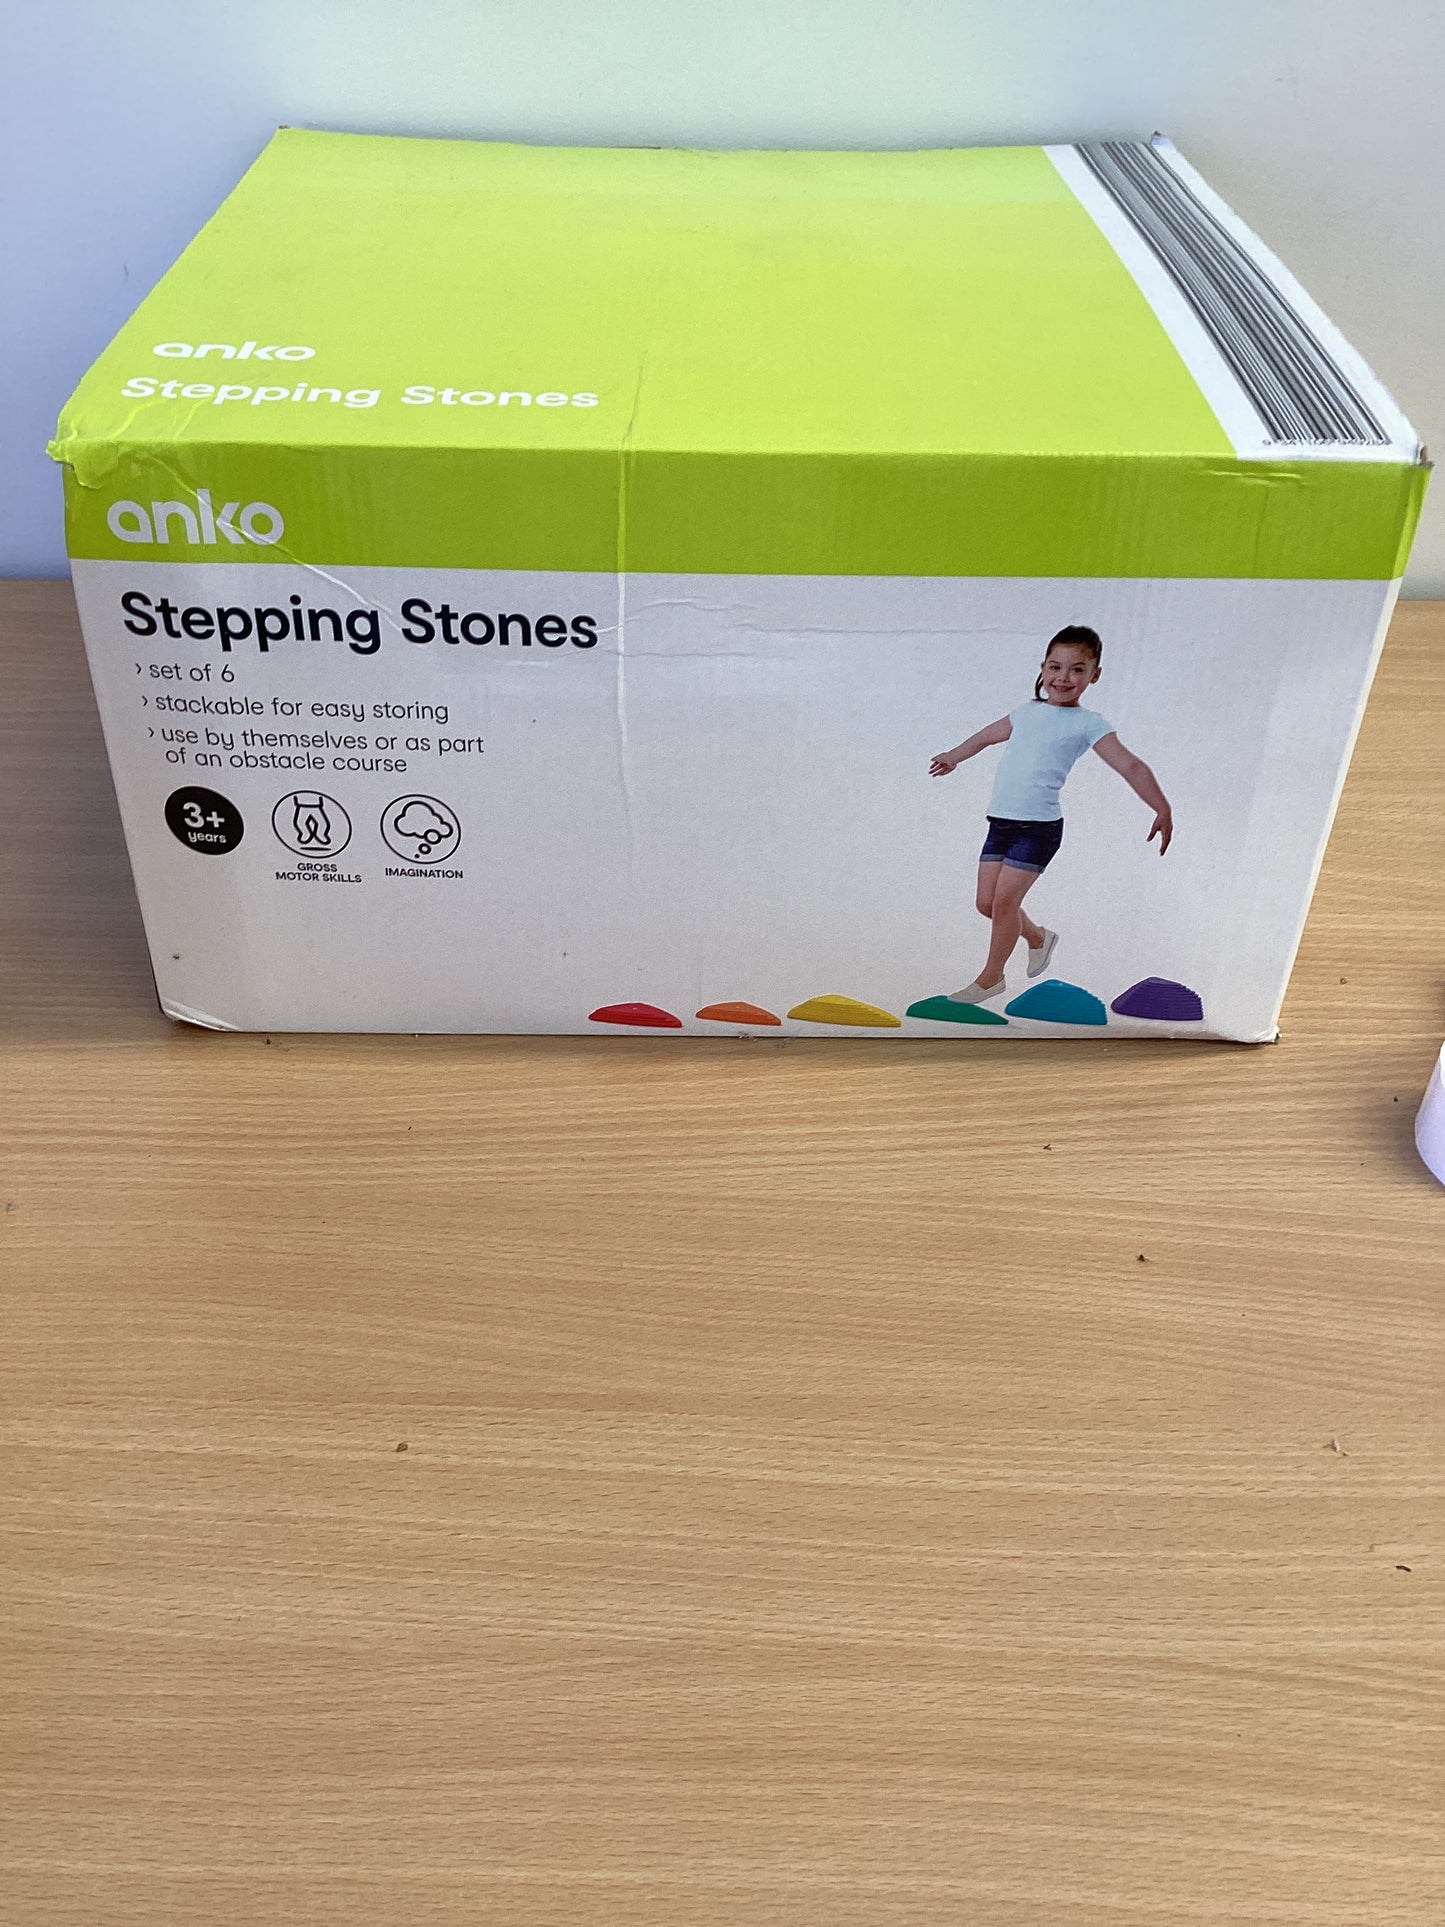 Stepping stones - new in box